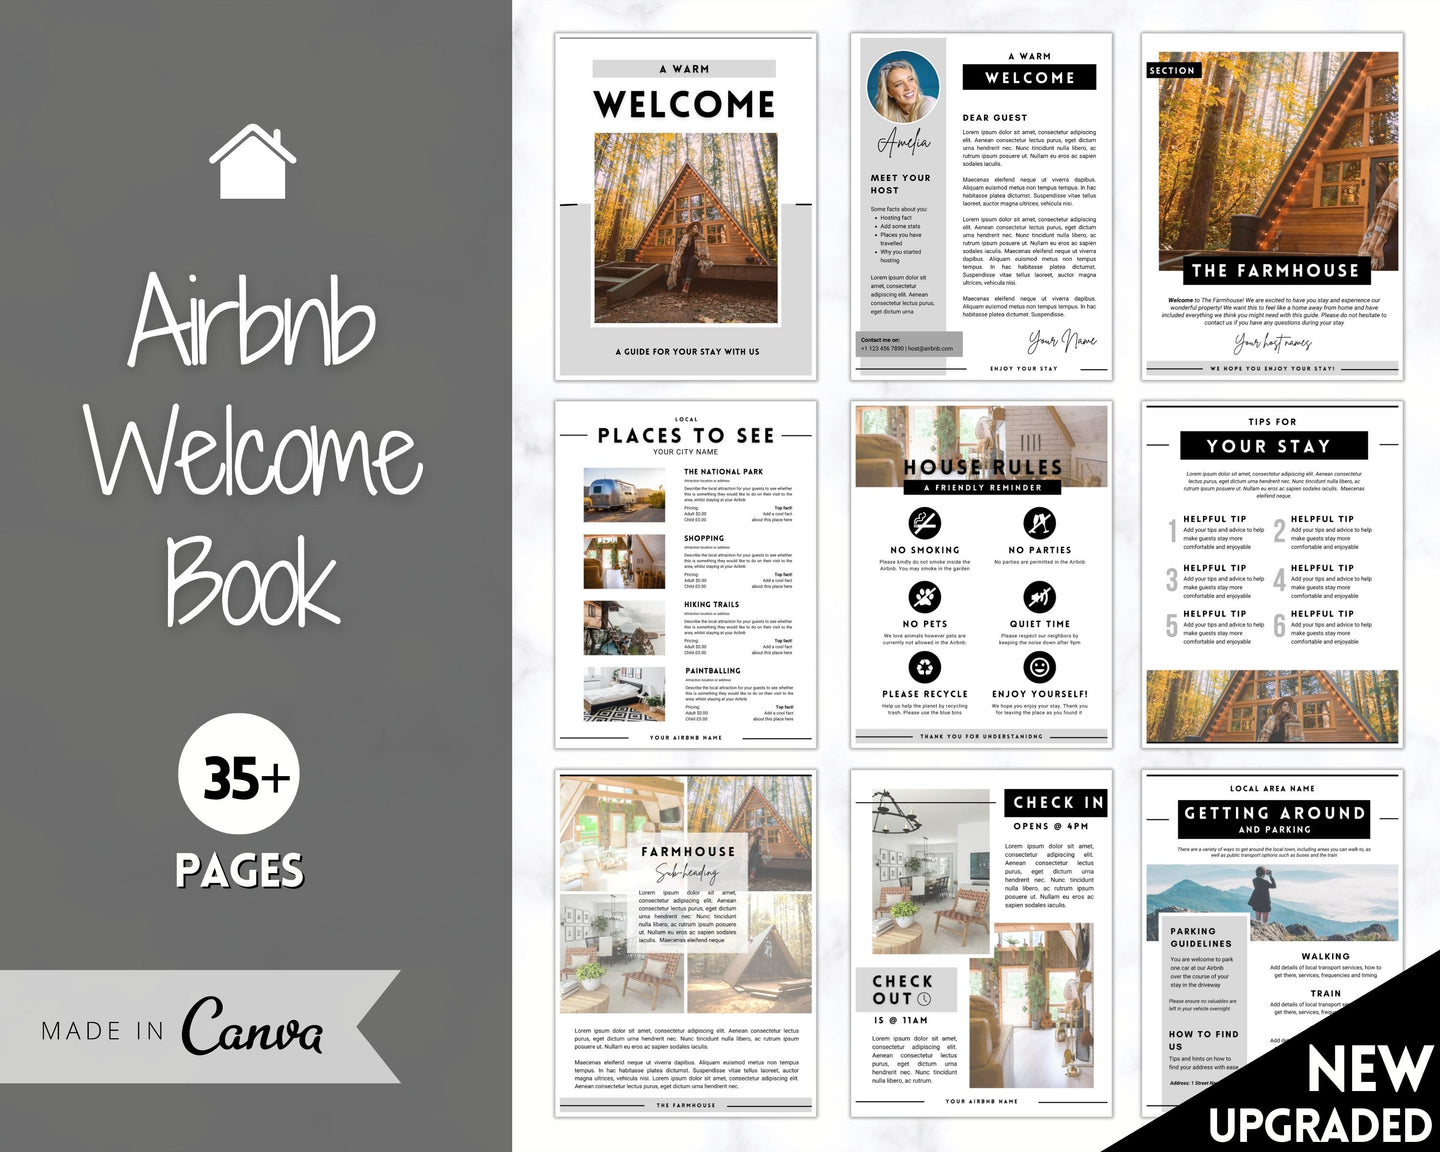 Airbnb Welcome Book Template | Editable Canva Welcome Guide for Vacation Rentals | Mono